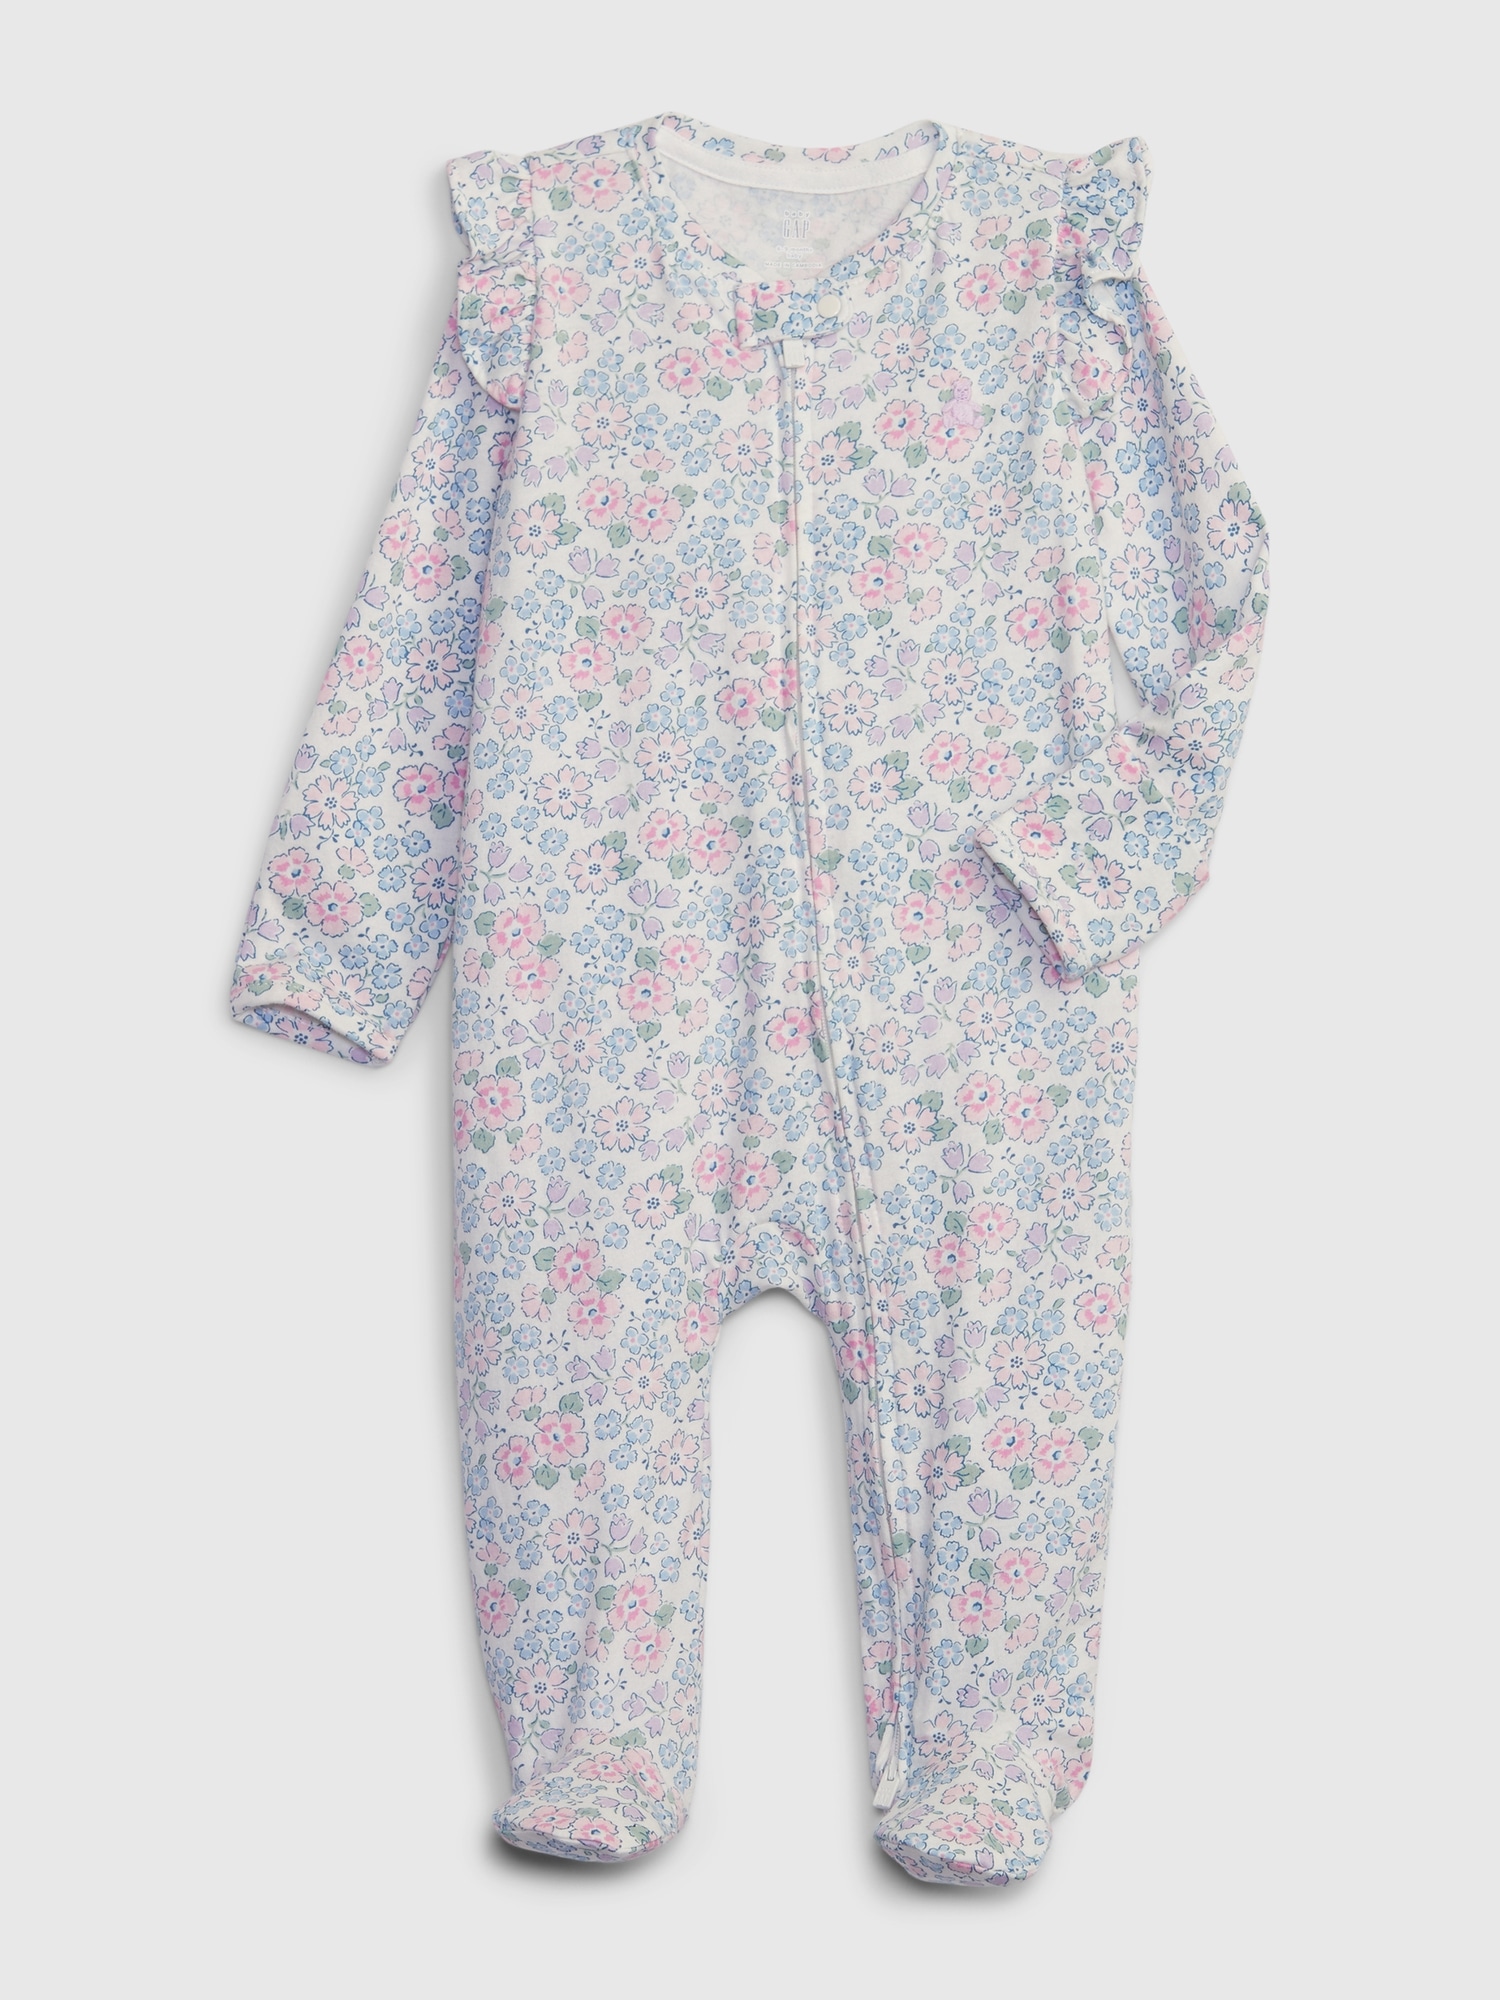 Gap Kids' Baby First Favorites One-piece In New Off White Floral